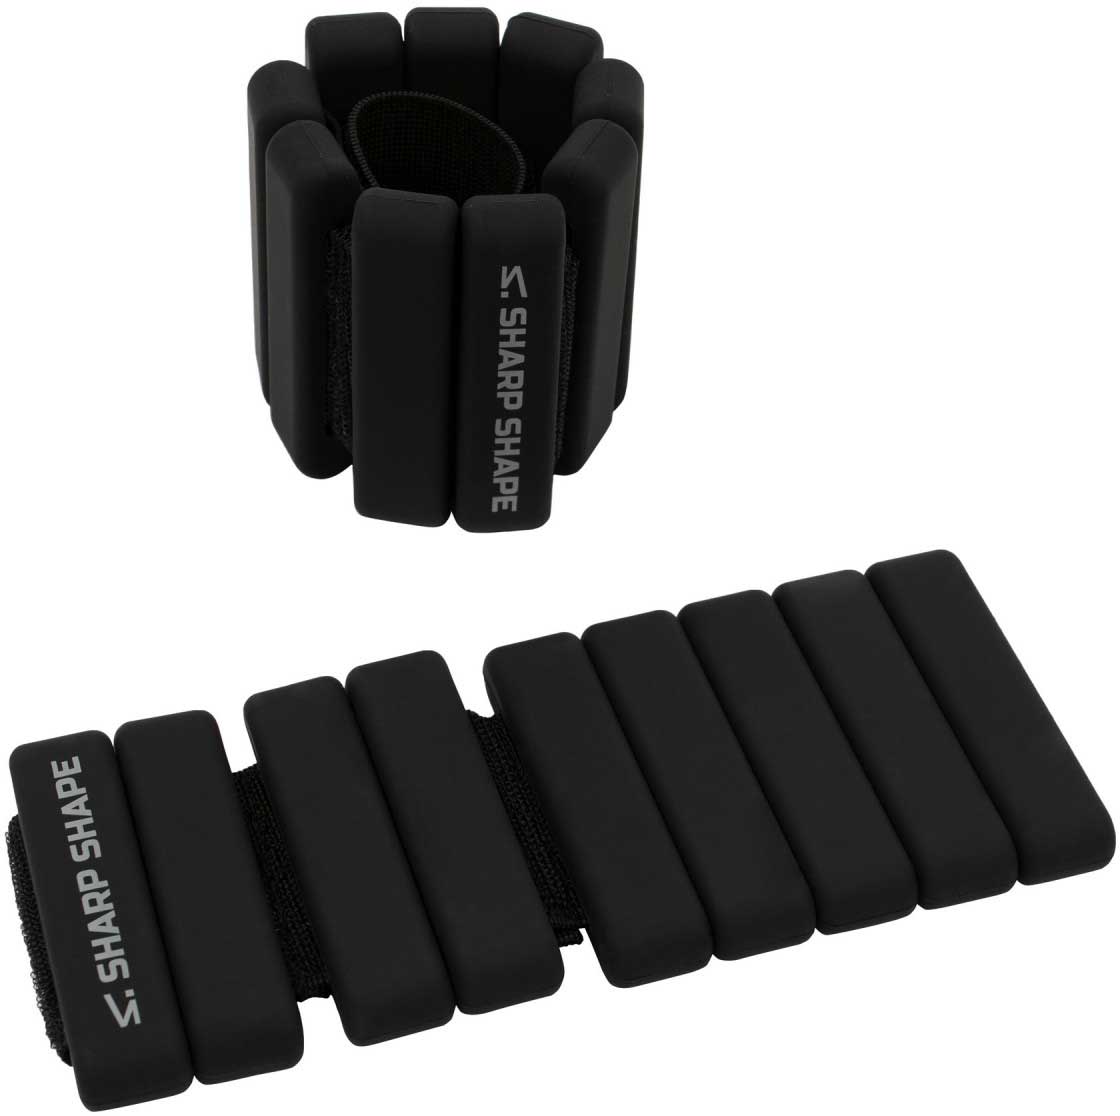 Wrist and ankle weights